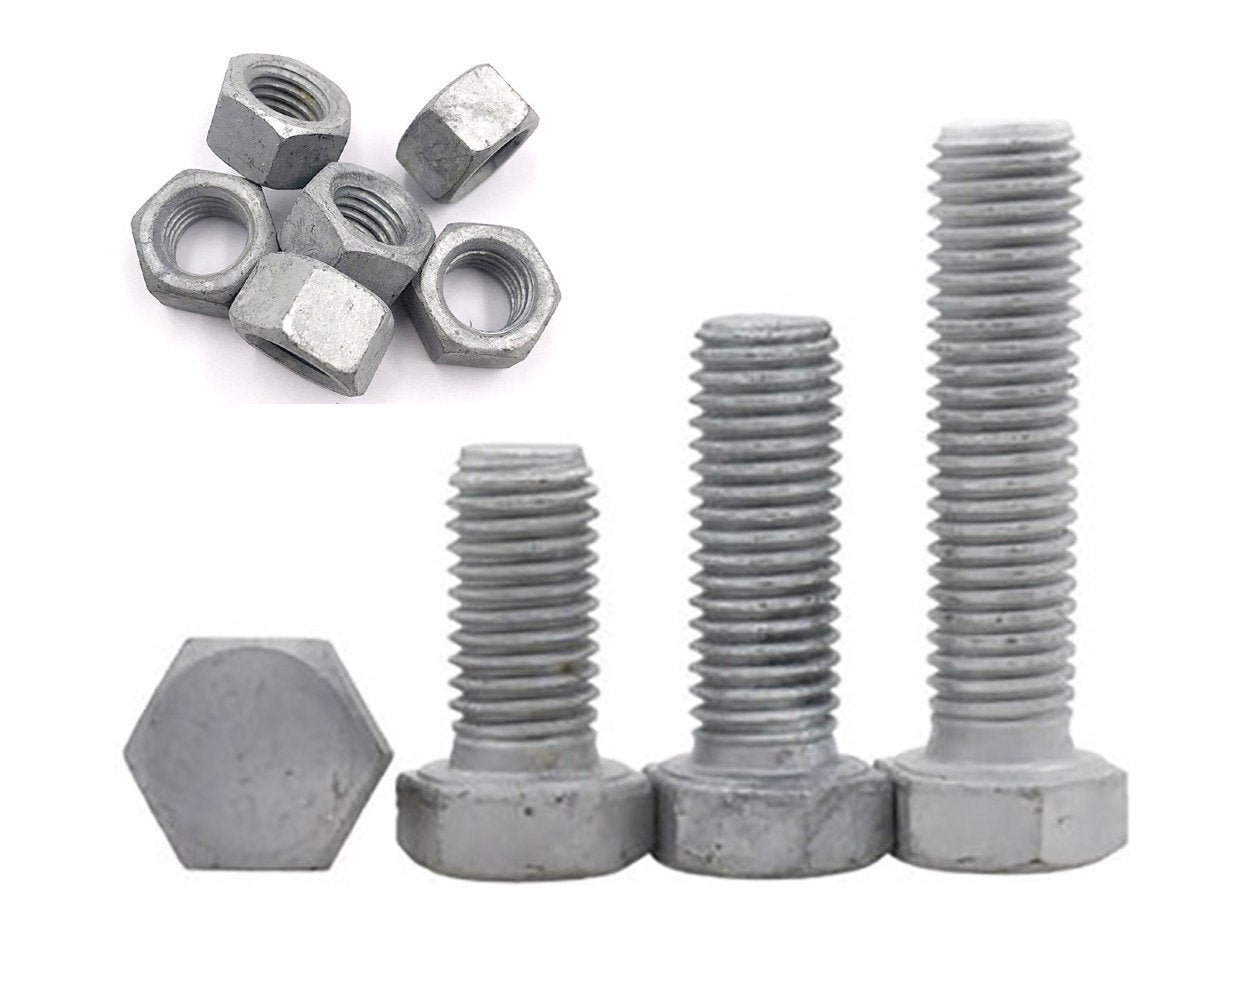 Structural Fasteners